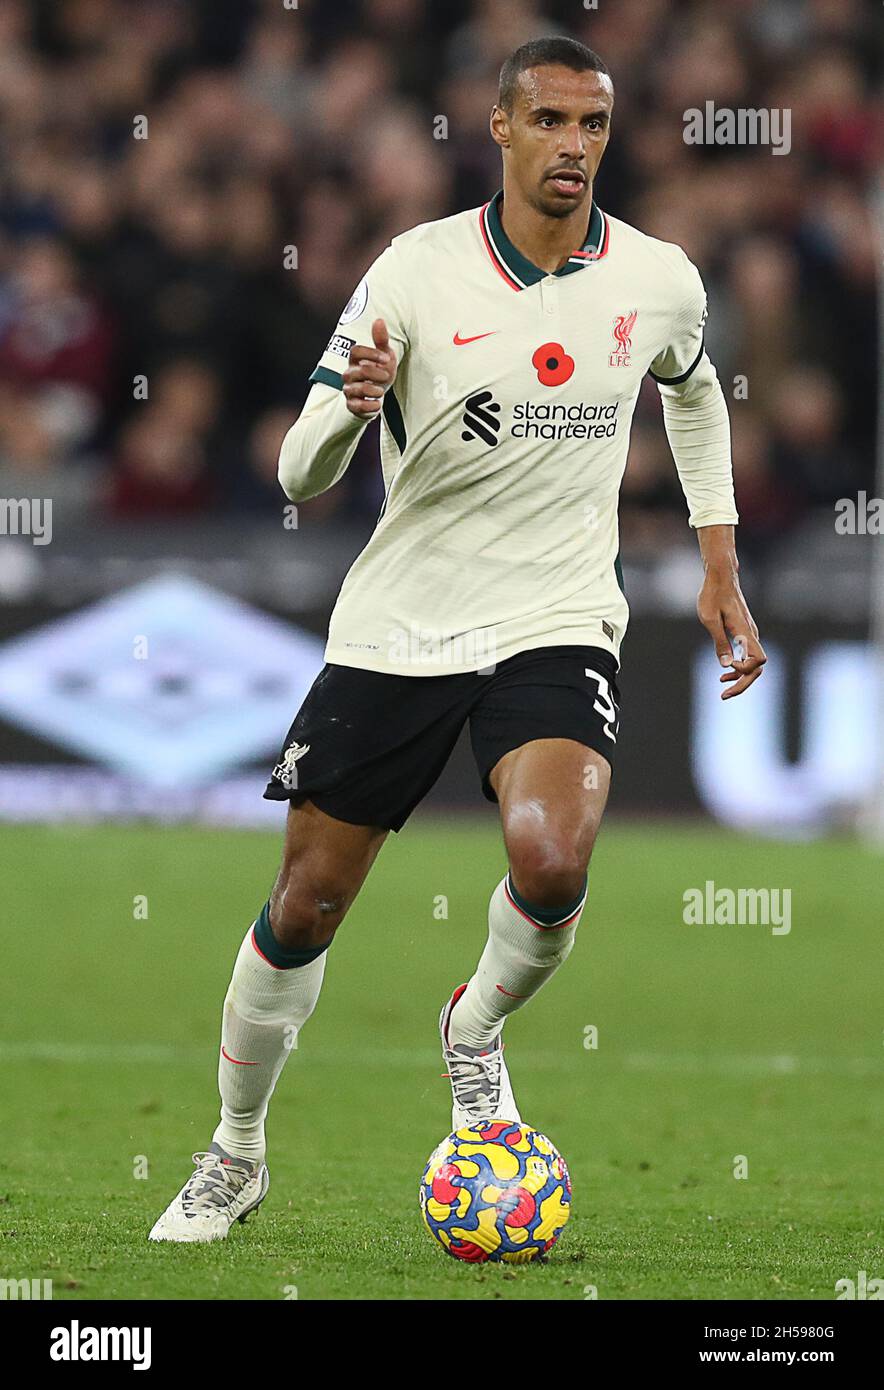 London, England, 7th November 2021. Joel Matip of Liverpool during the Premier League match at the London Stadium, London. Picture credit should read: Paul Terry / Sportimage Credit: Sportimage/Alamy Live News Stock Photo